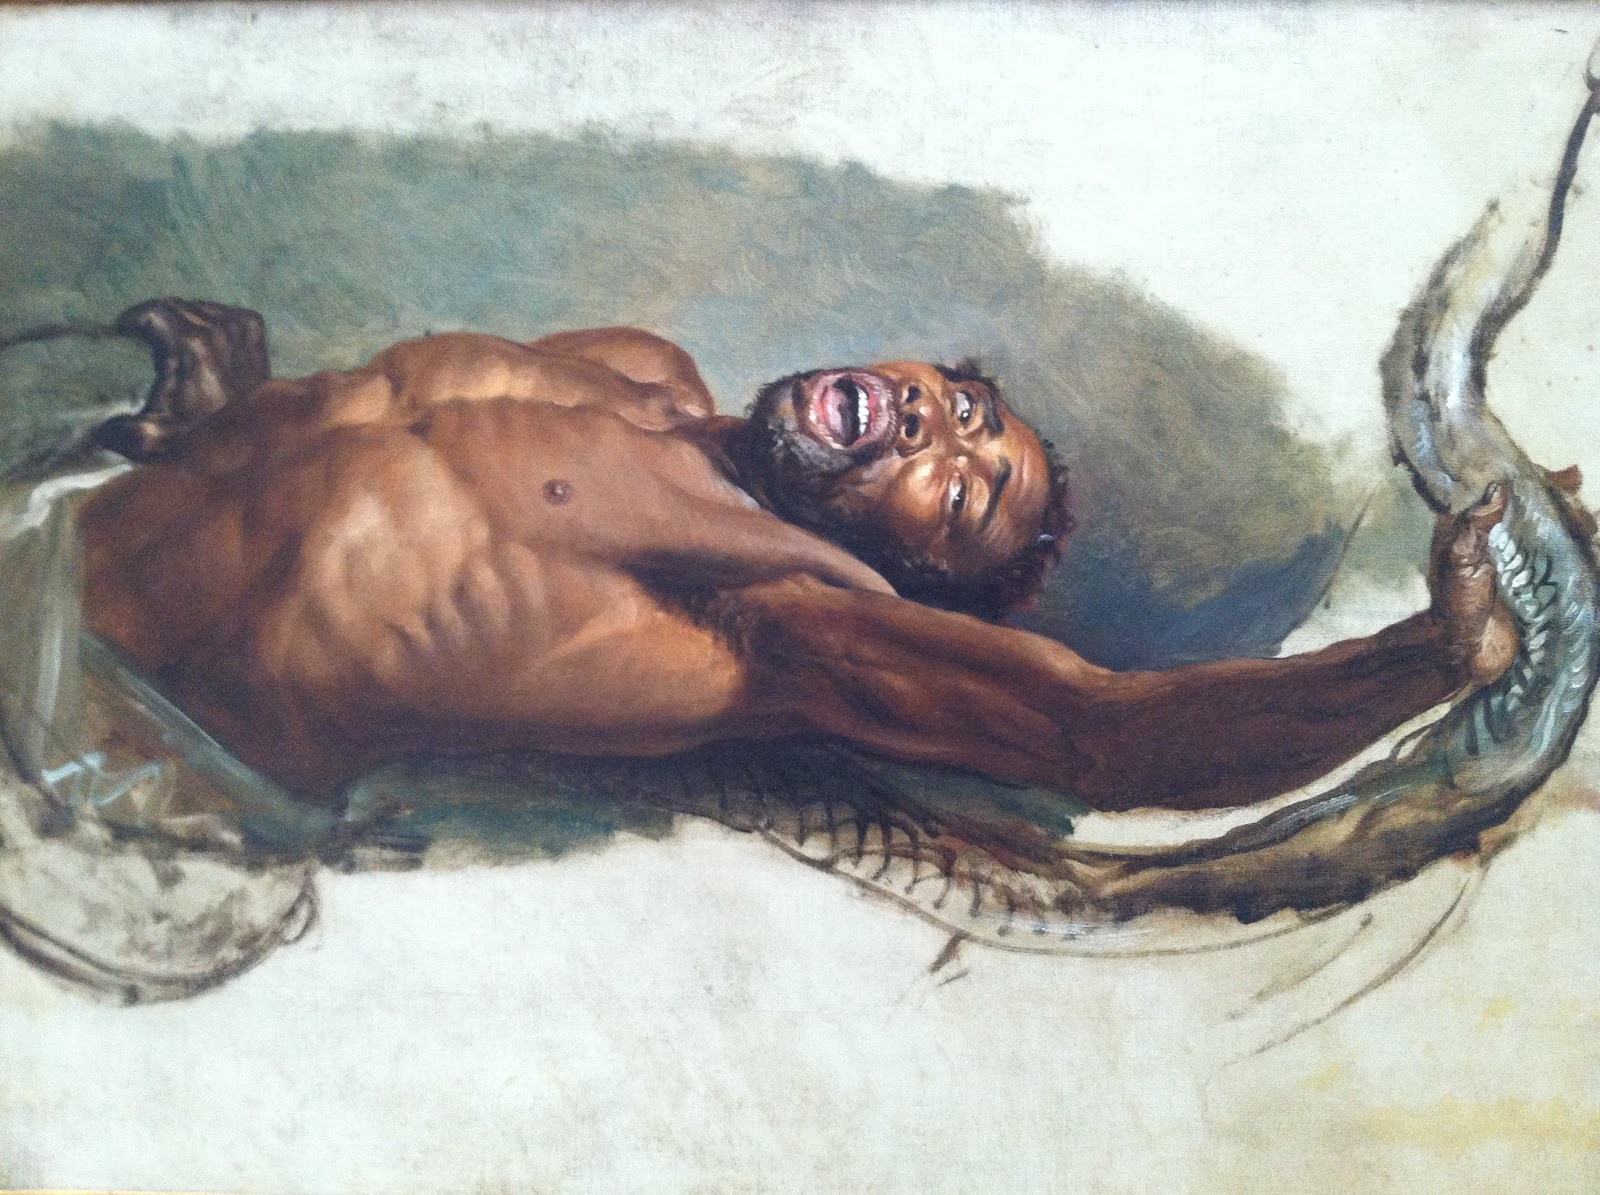 Man Struggling with a Boa Constrictor, James Ward